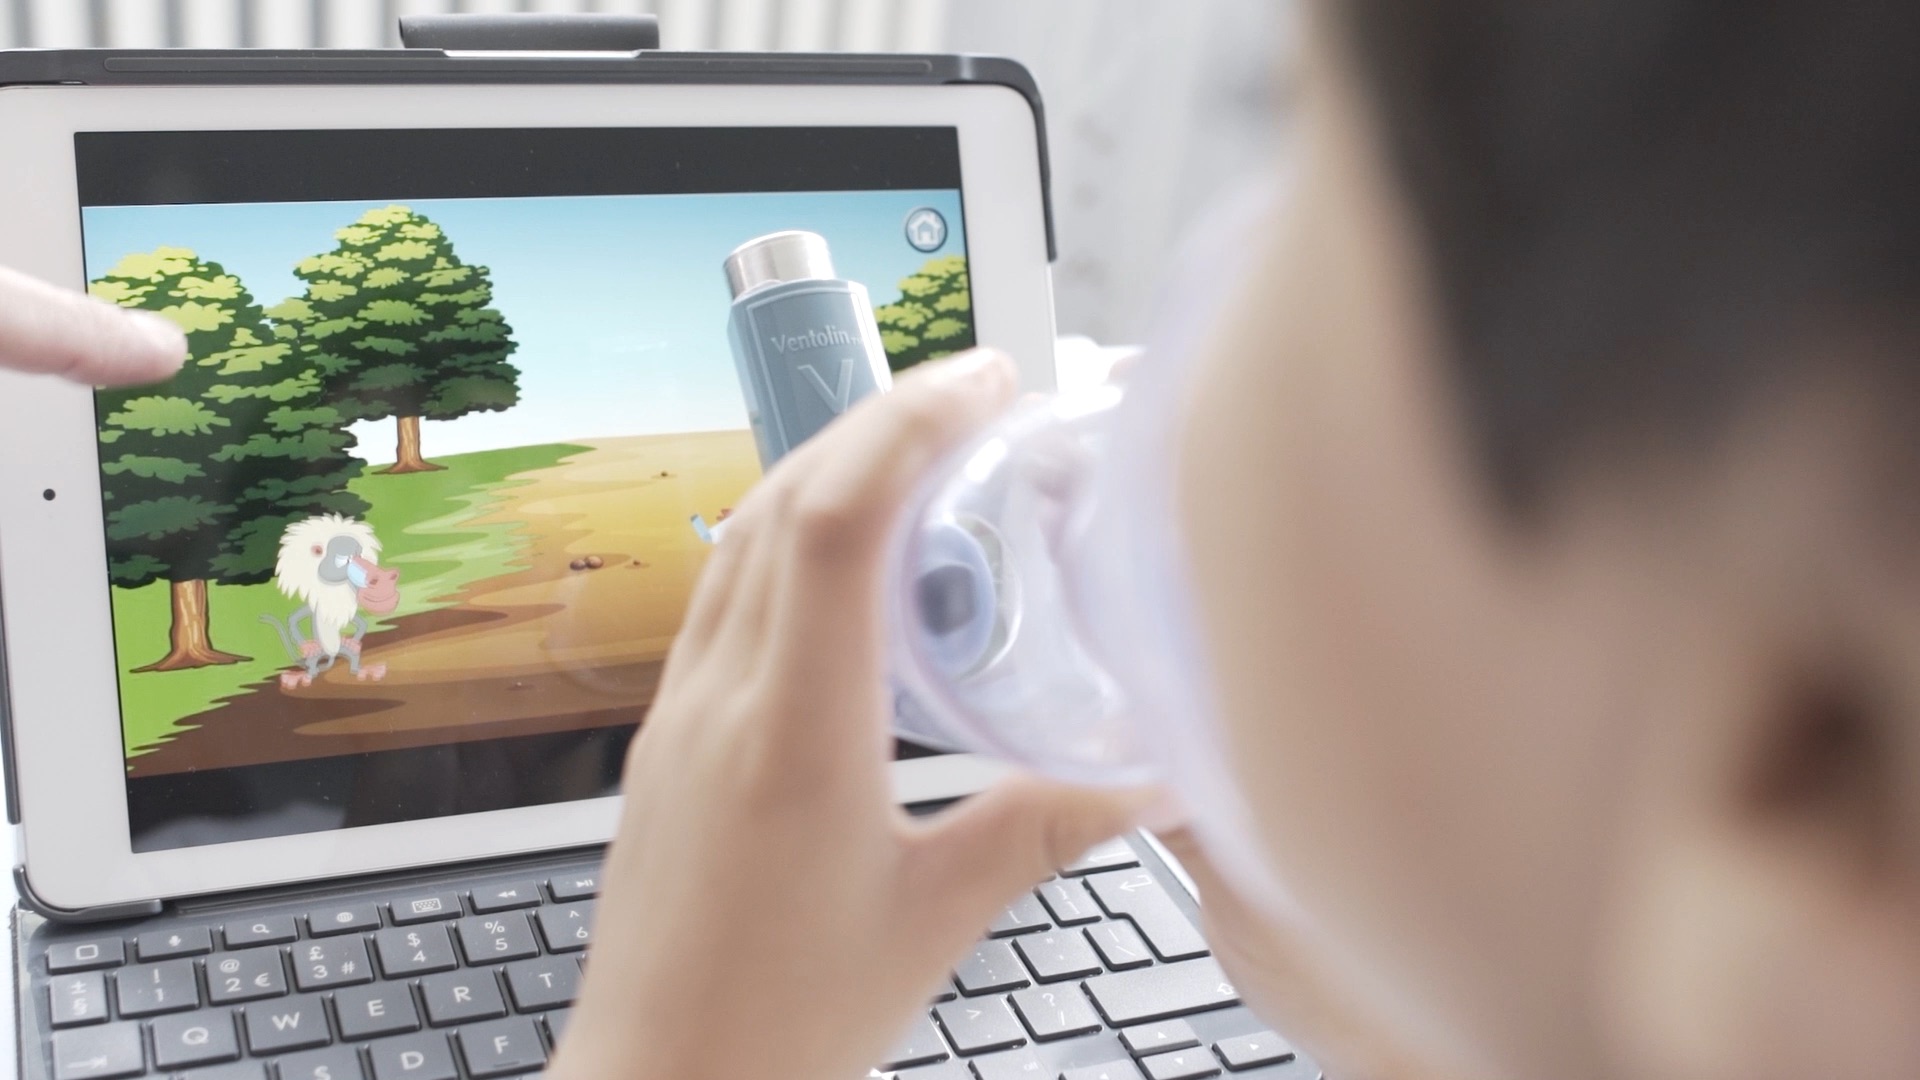 A child uses an inhaler with Raif-Tone app game developed by Clin-e-cal.